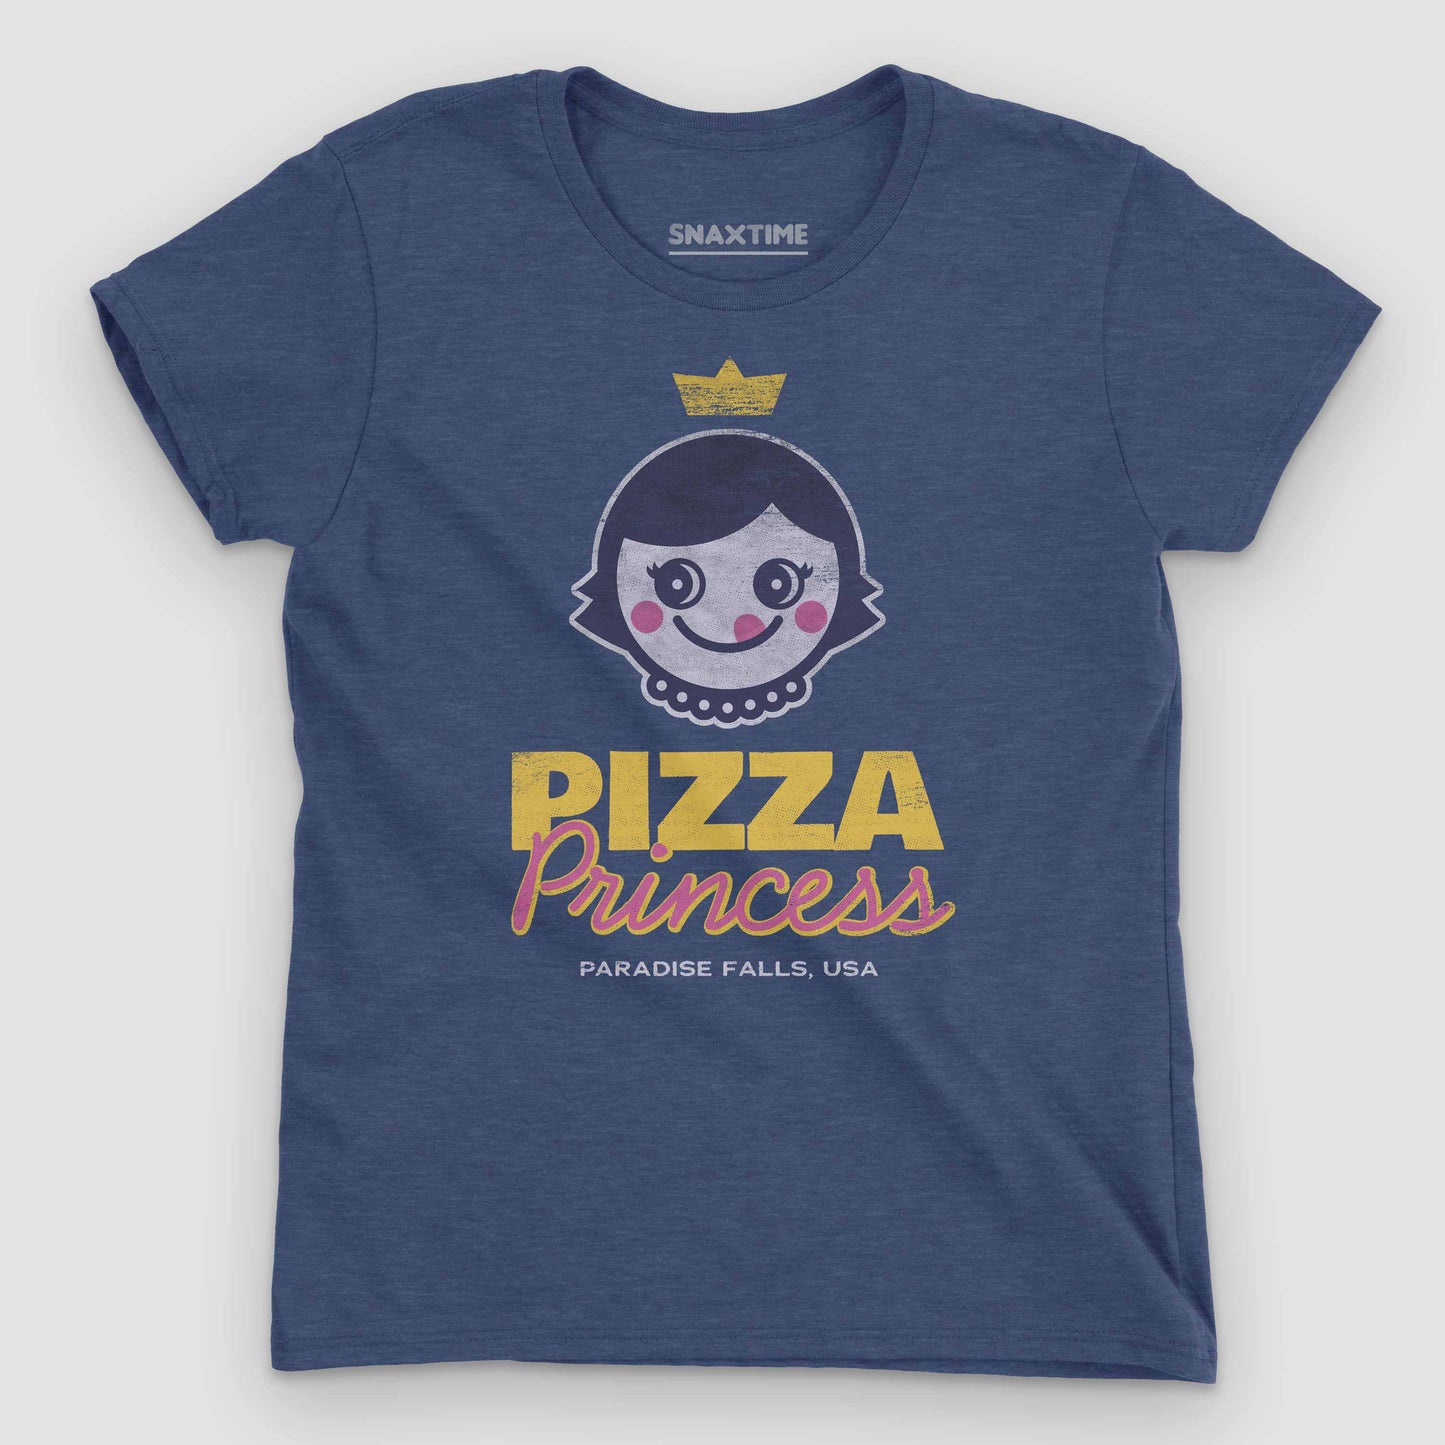 Heather Blue Pizza Princess Women's Graphic T-Shirt by Snaxtime